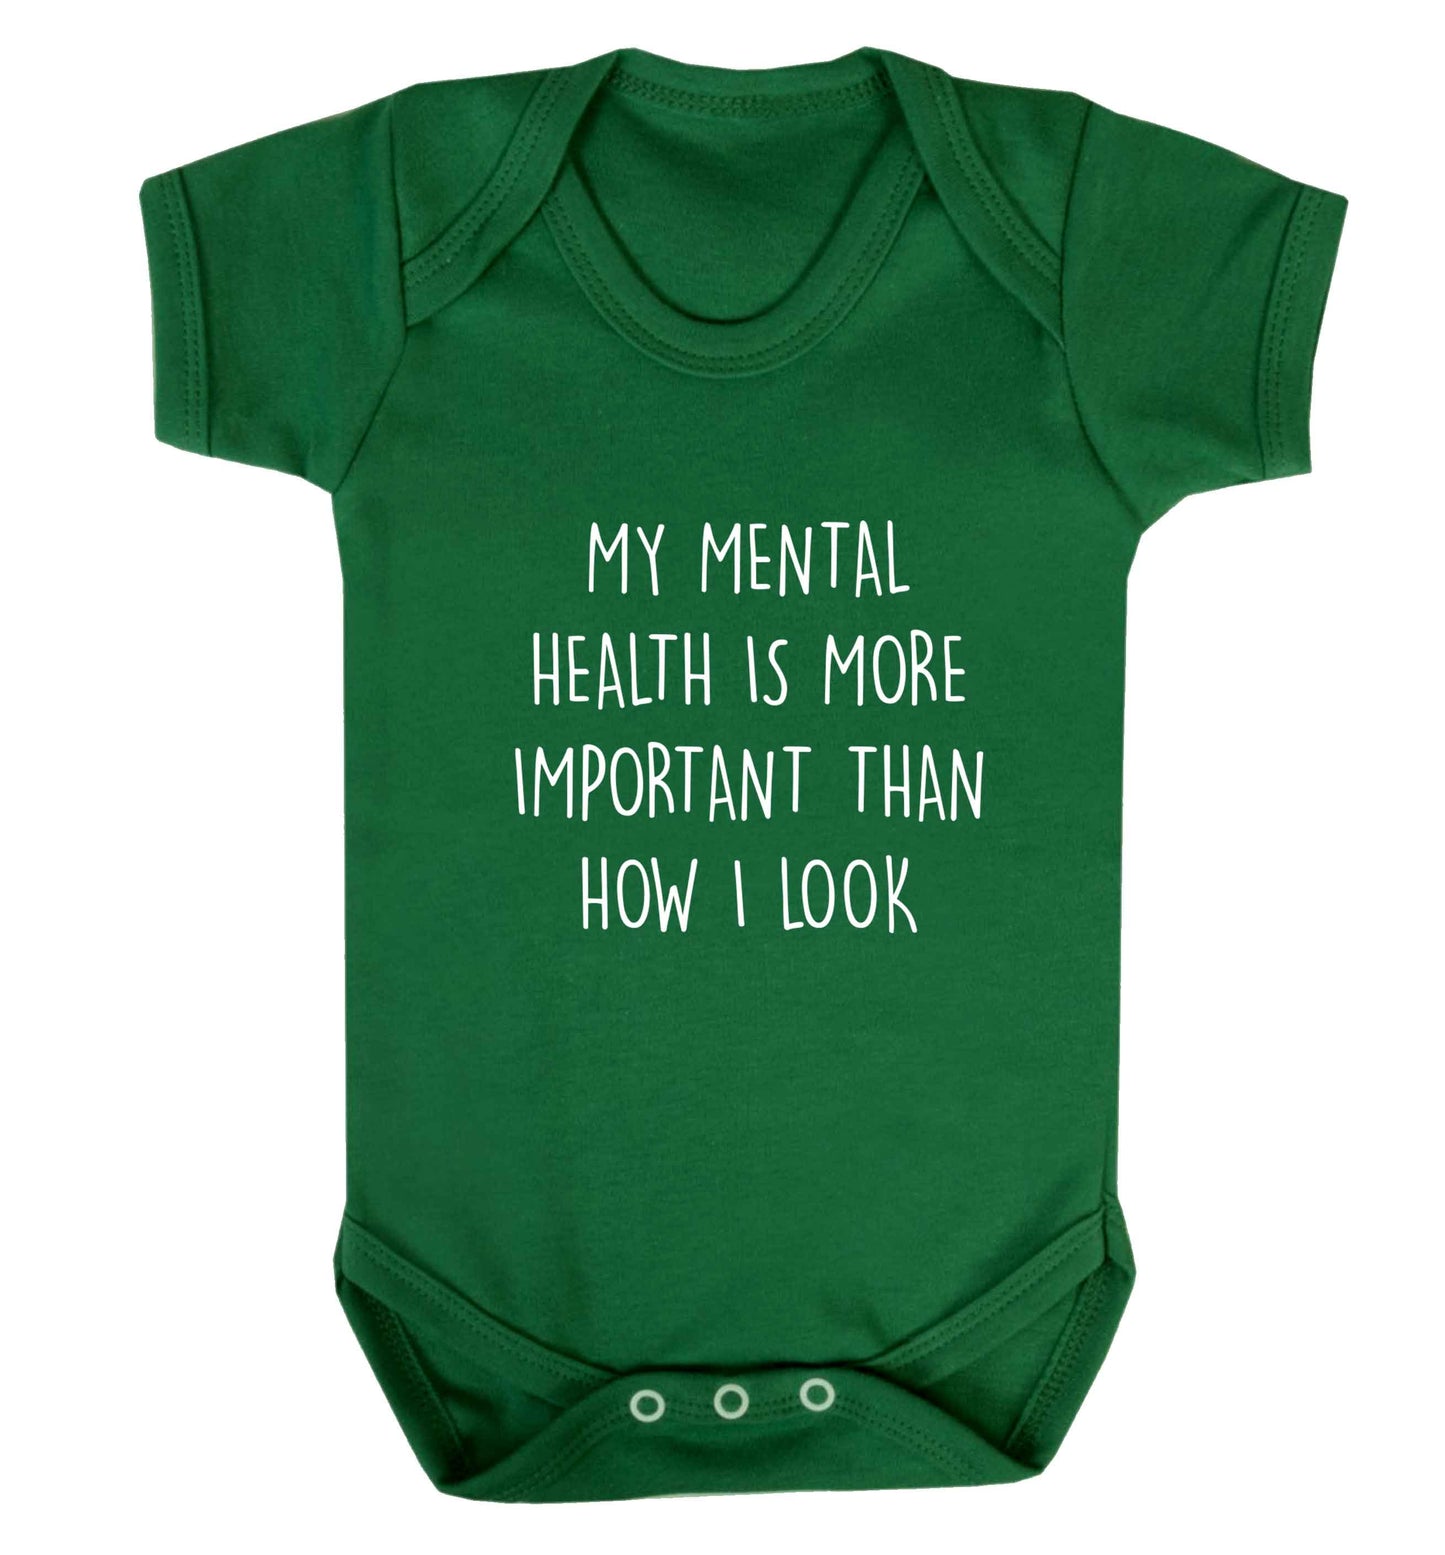 My mental health is more importnat than how I look baby vest green 18-24 months